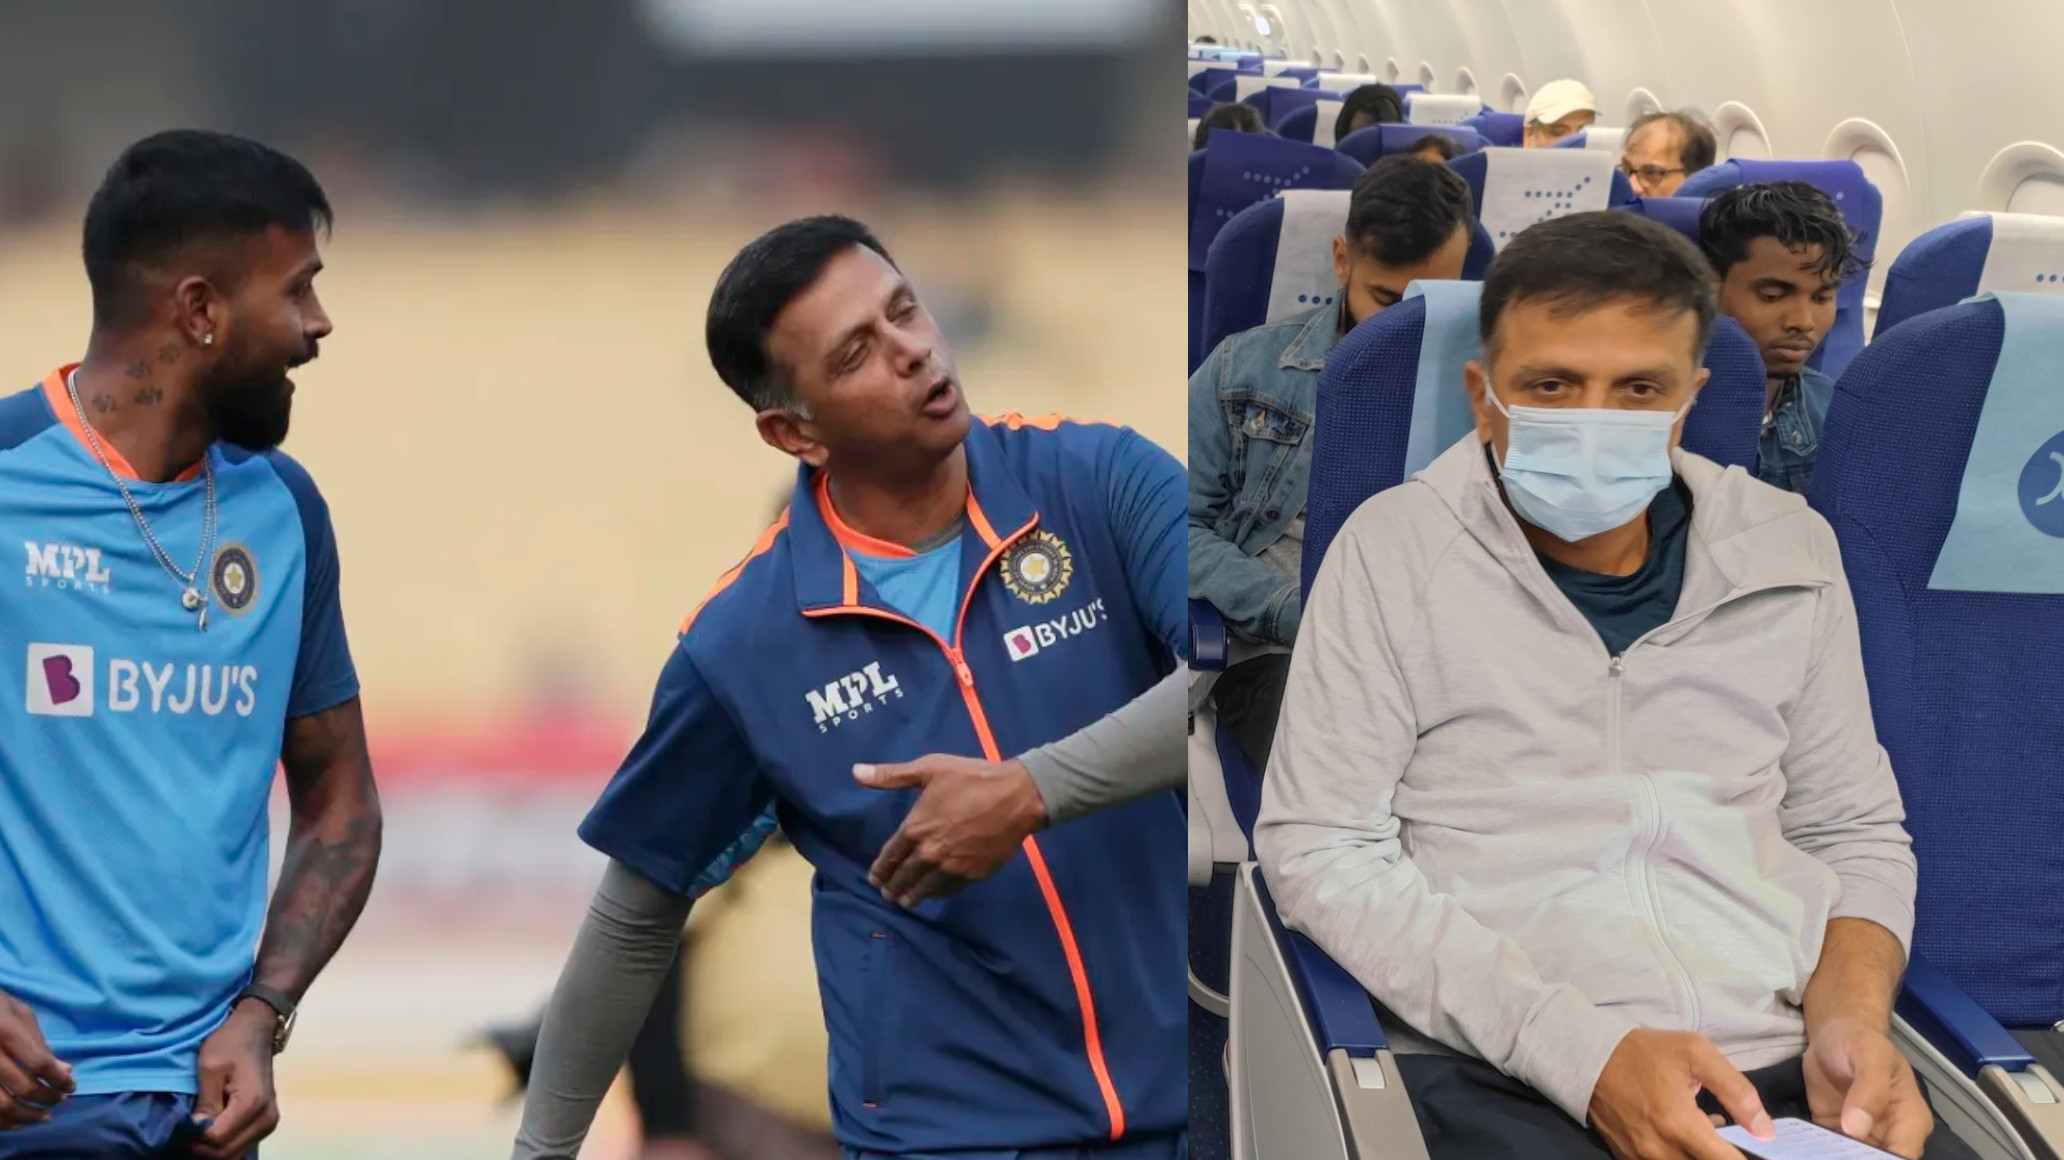 IND v SL 2023: Rahul Dravid leaves Team India, flies to Bengaluru due to health issues